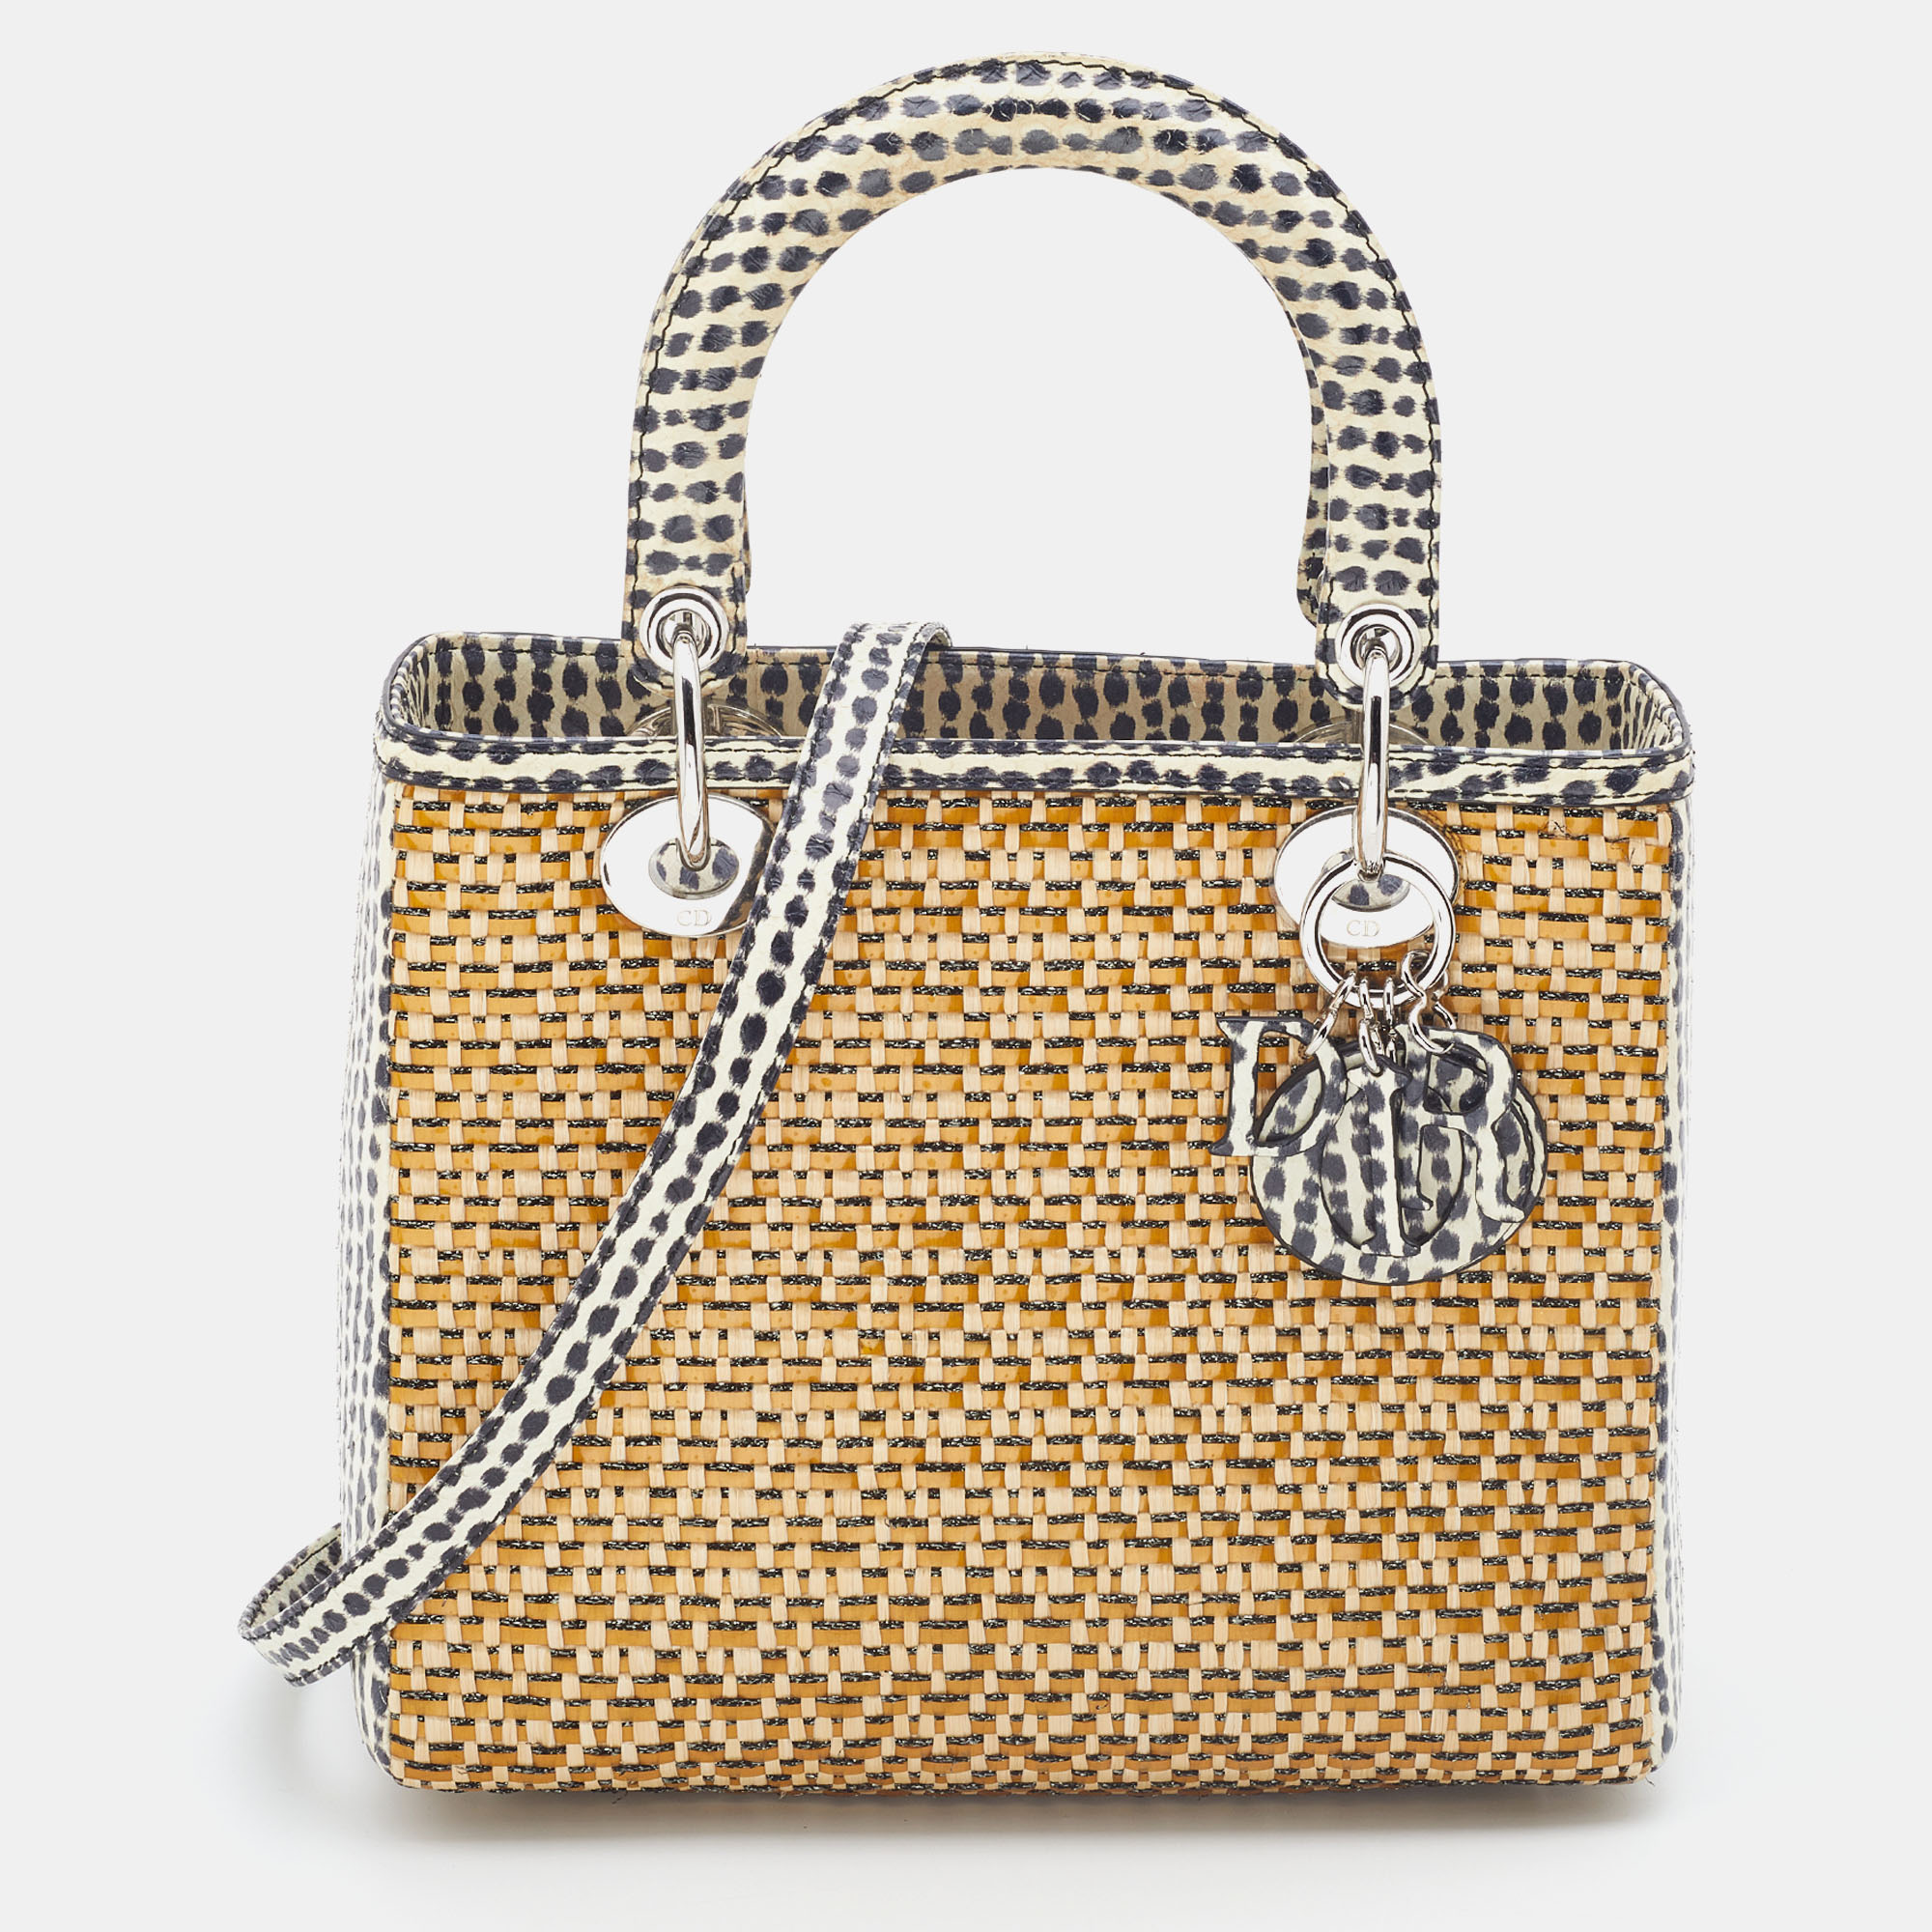 Dior Beige/Monochrome Woven Straw and Watersnake Medium Lady Dior Tote